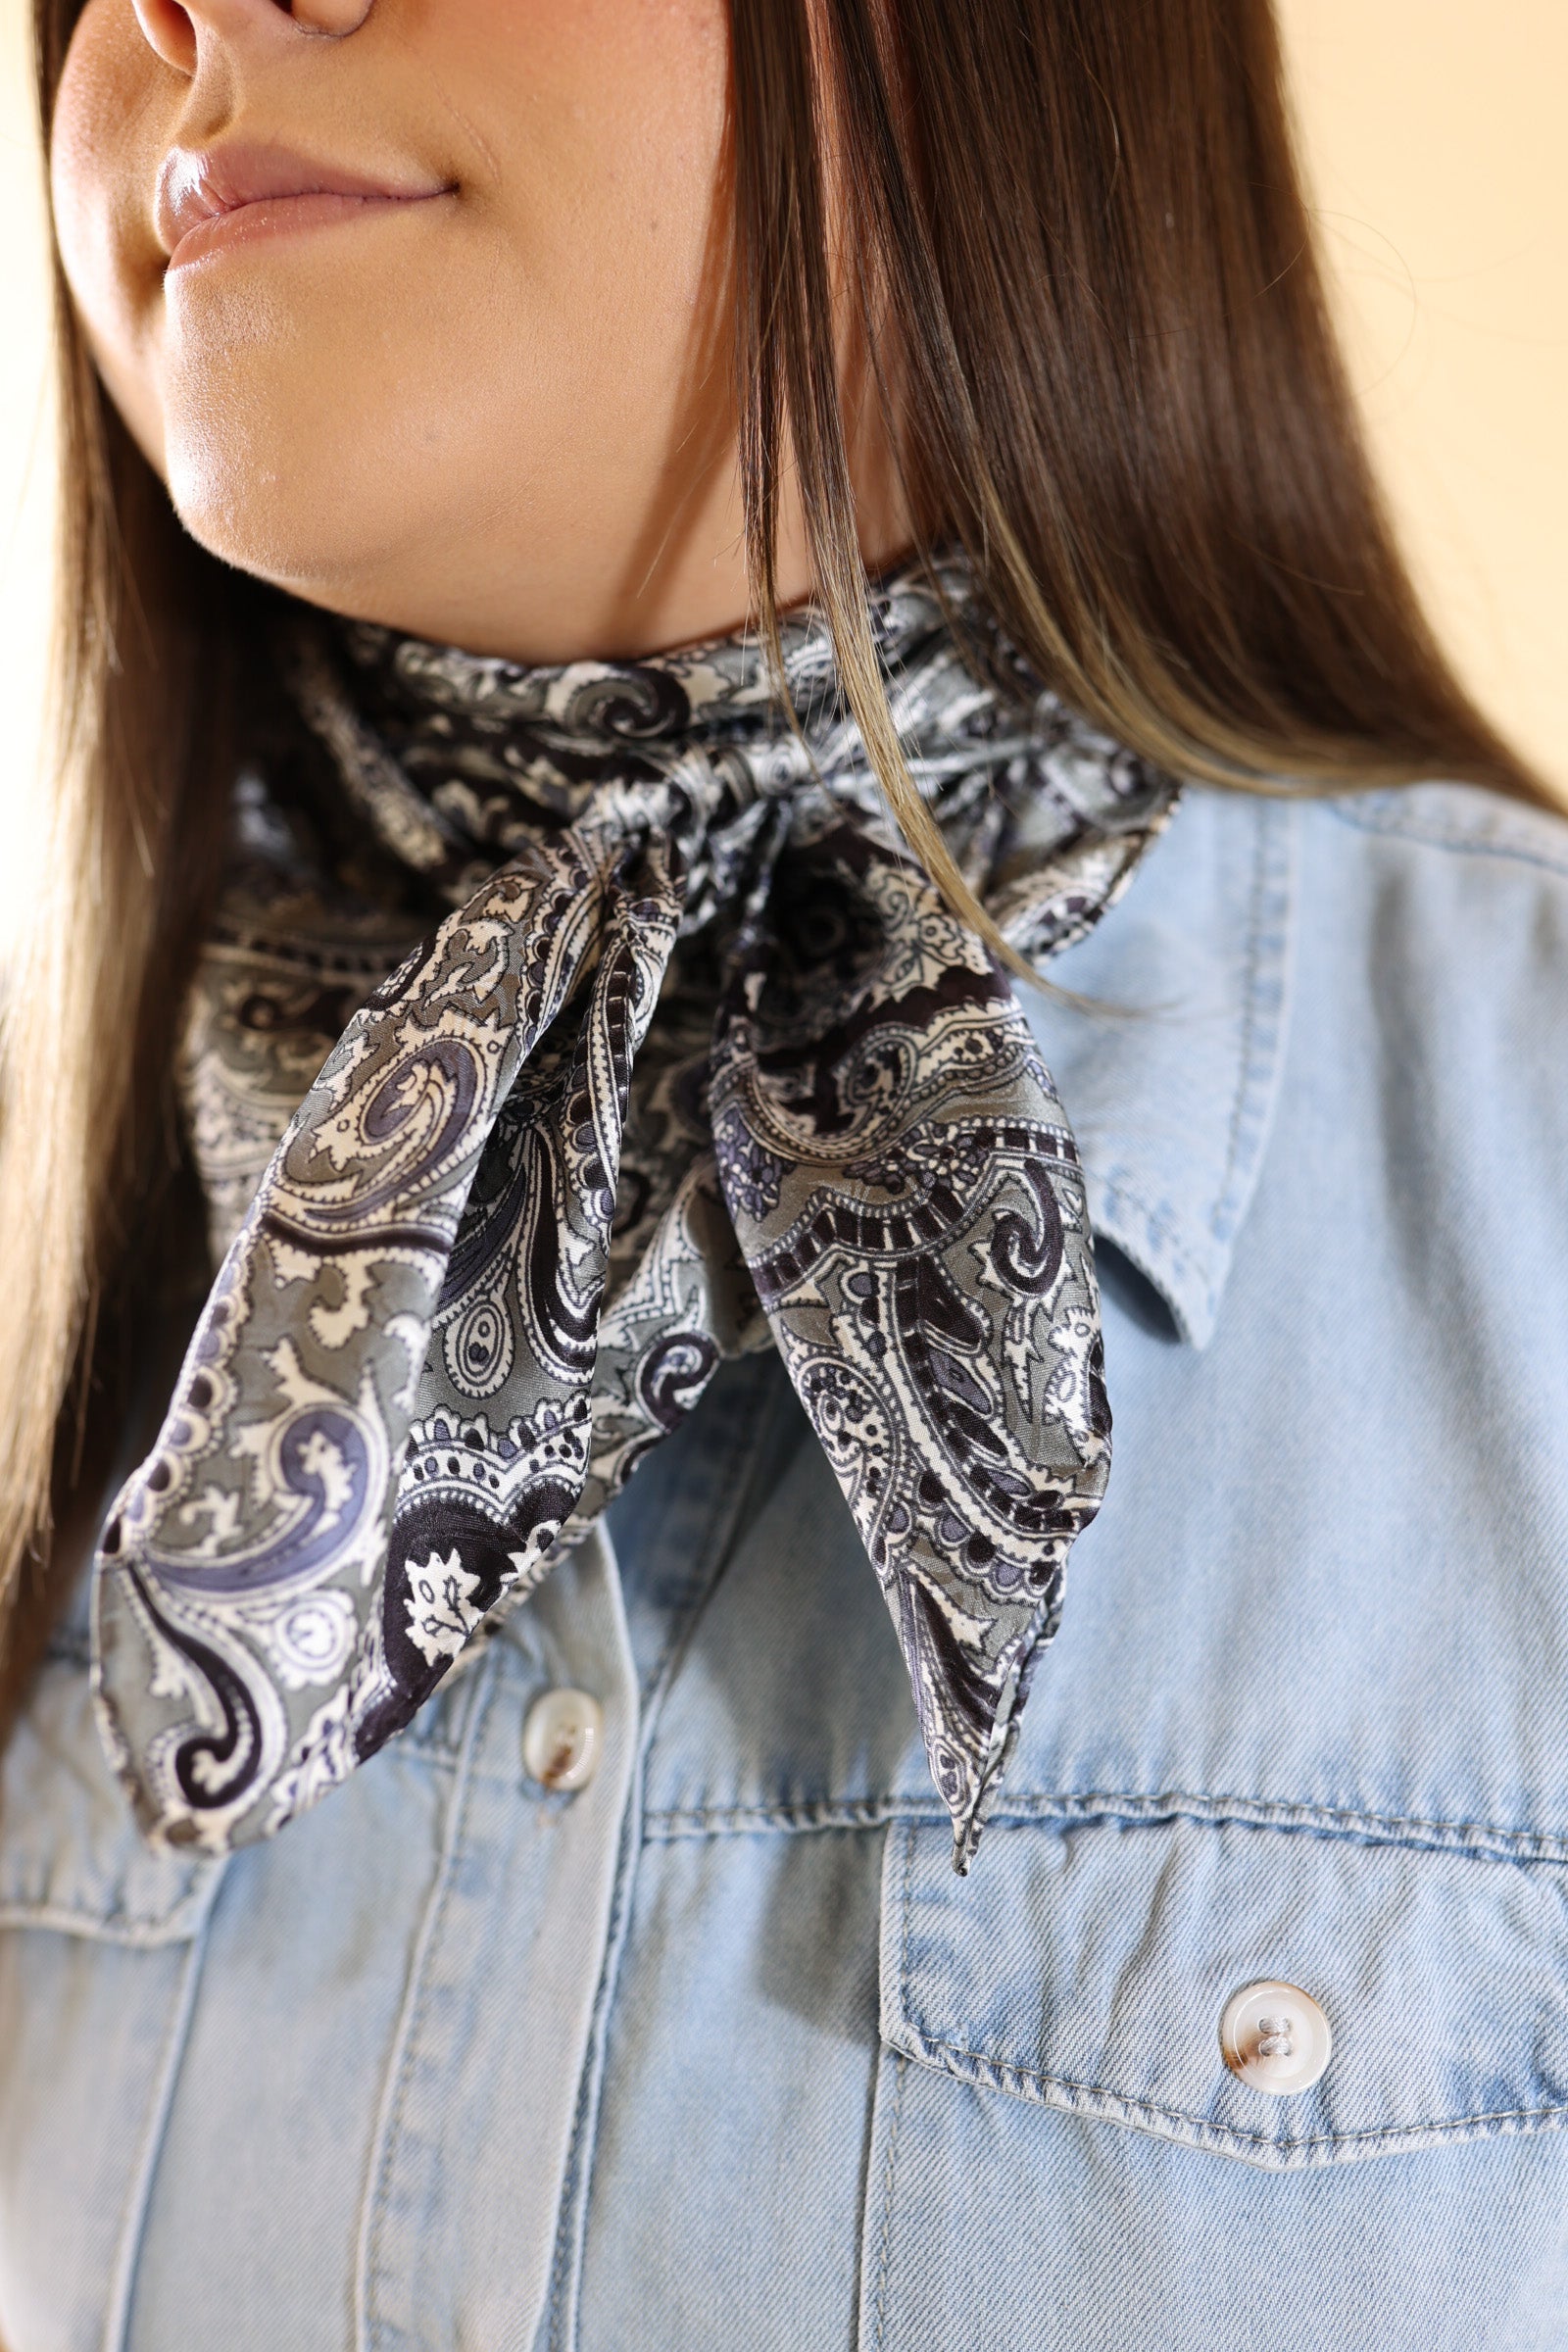 Paisley Wild Rag in Black and Silver - Giddy Up Glamour Boutique